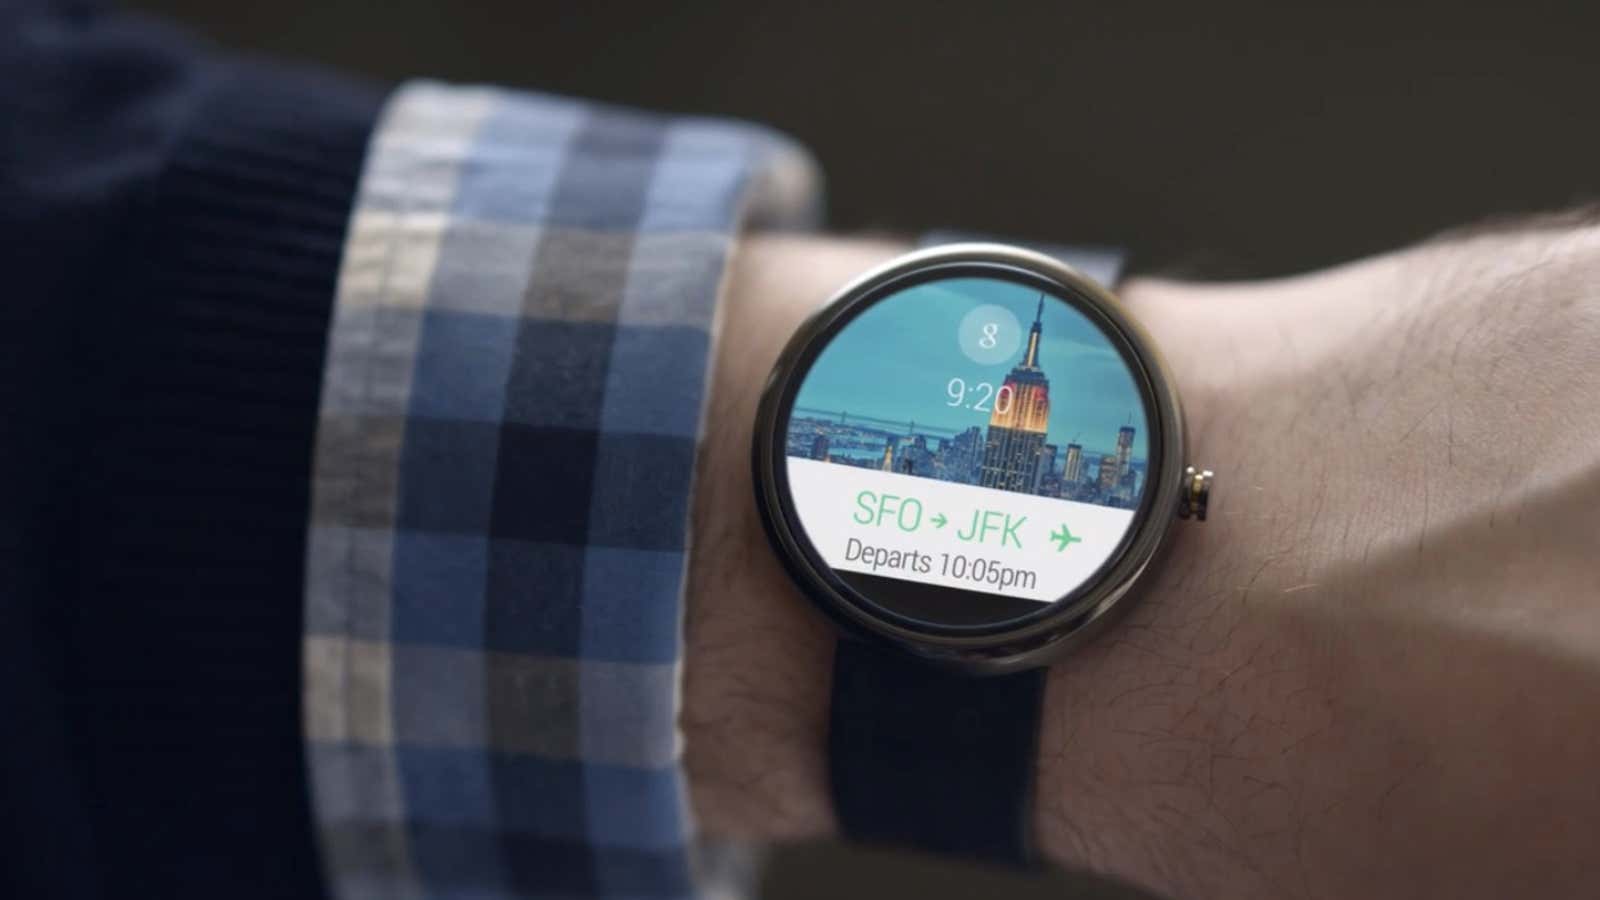 The “custom interface” for Google’s wearables bears a strong resemblance to Google Now.